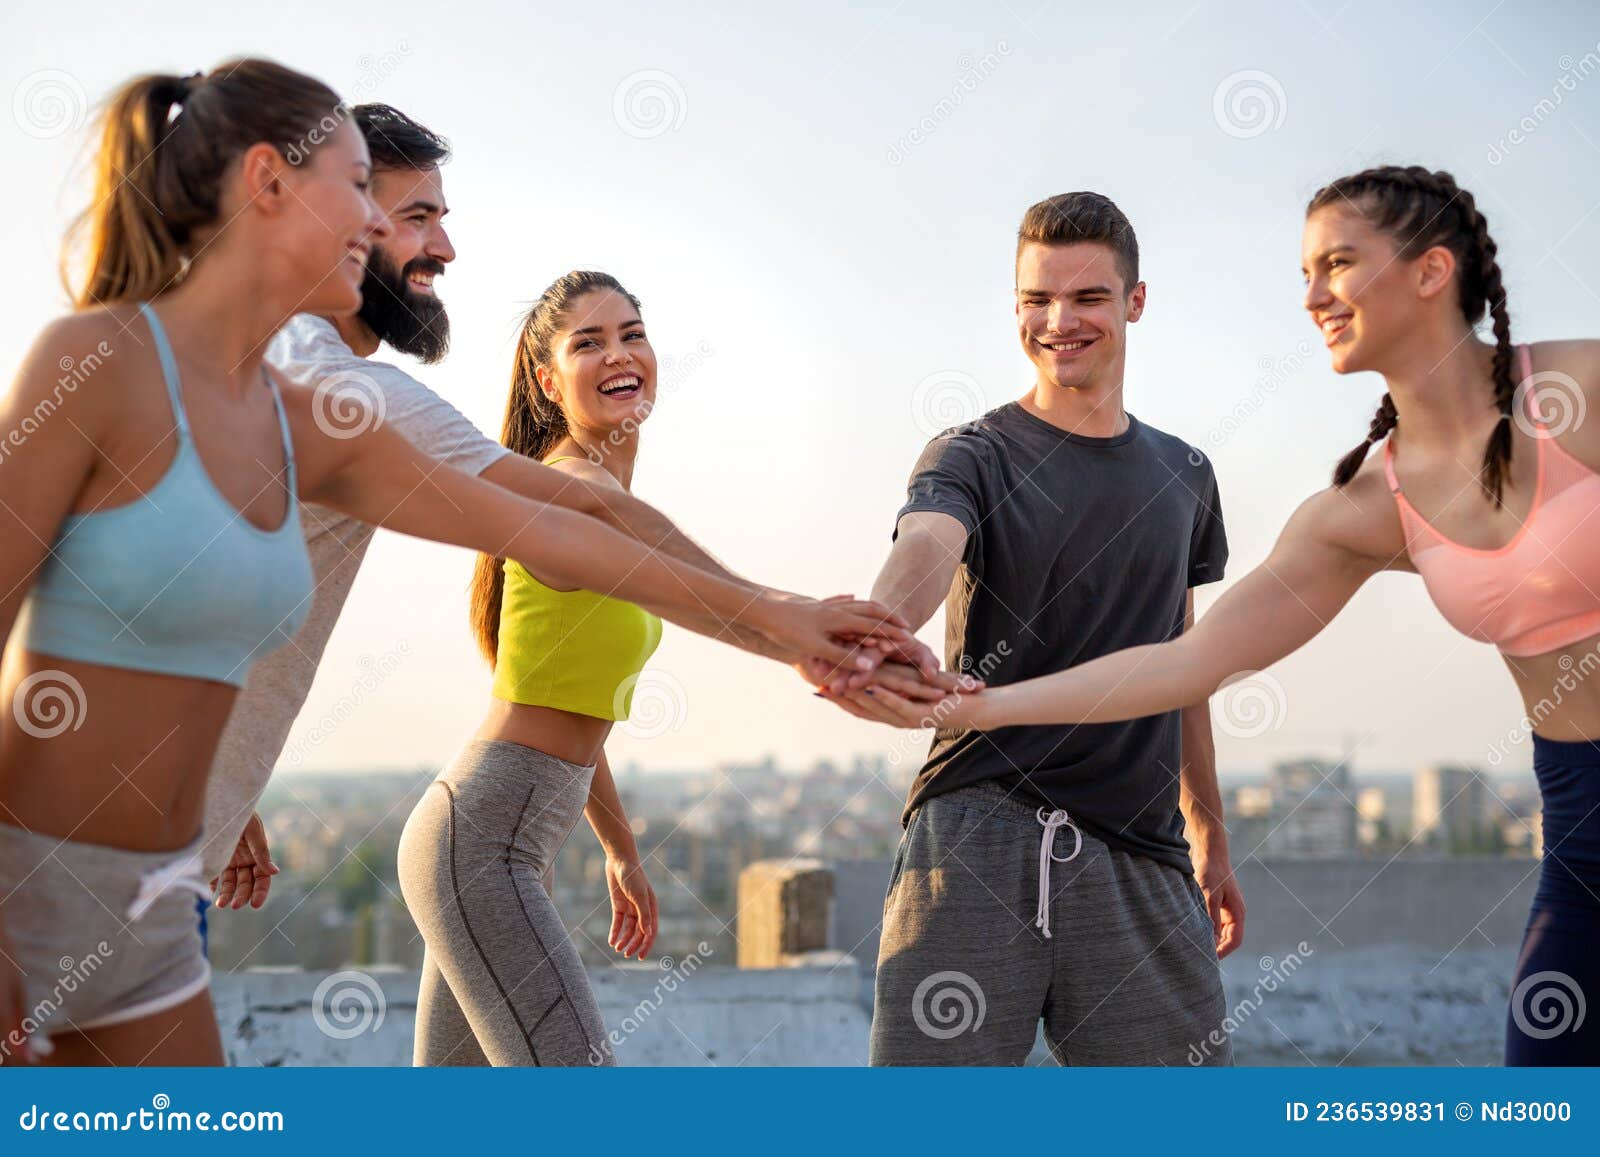 Group of Happy Fit People Friends Exercising Together Outdoor Stock ...